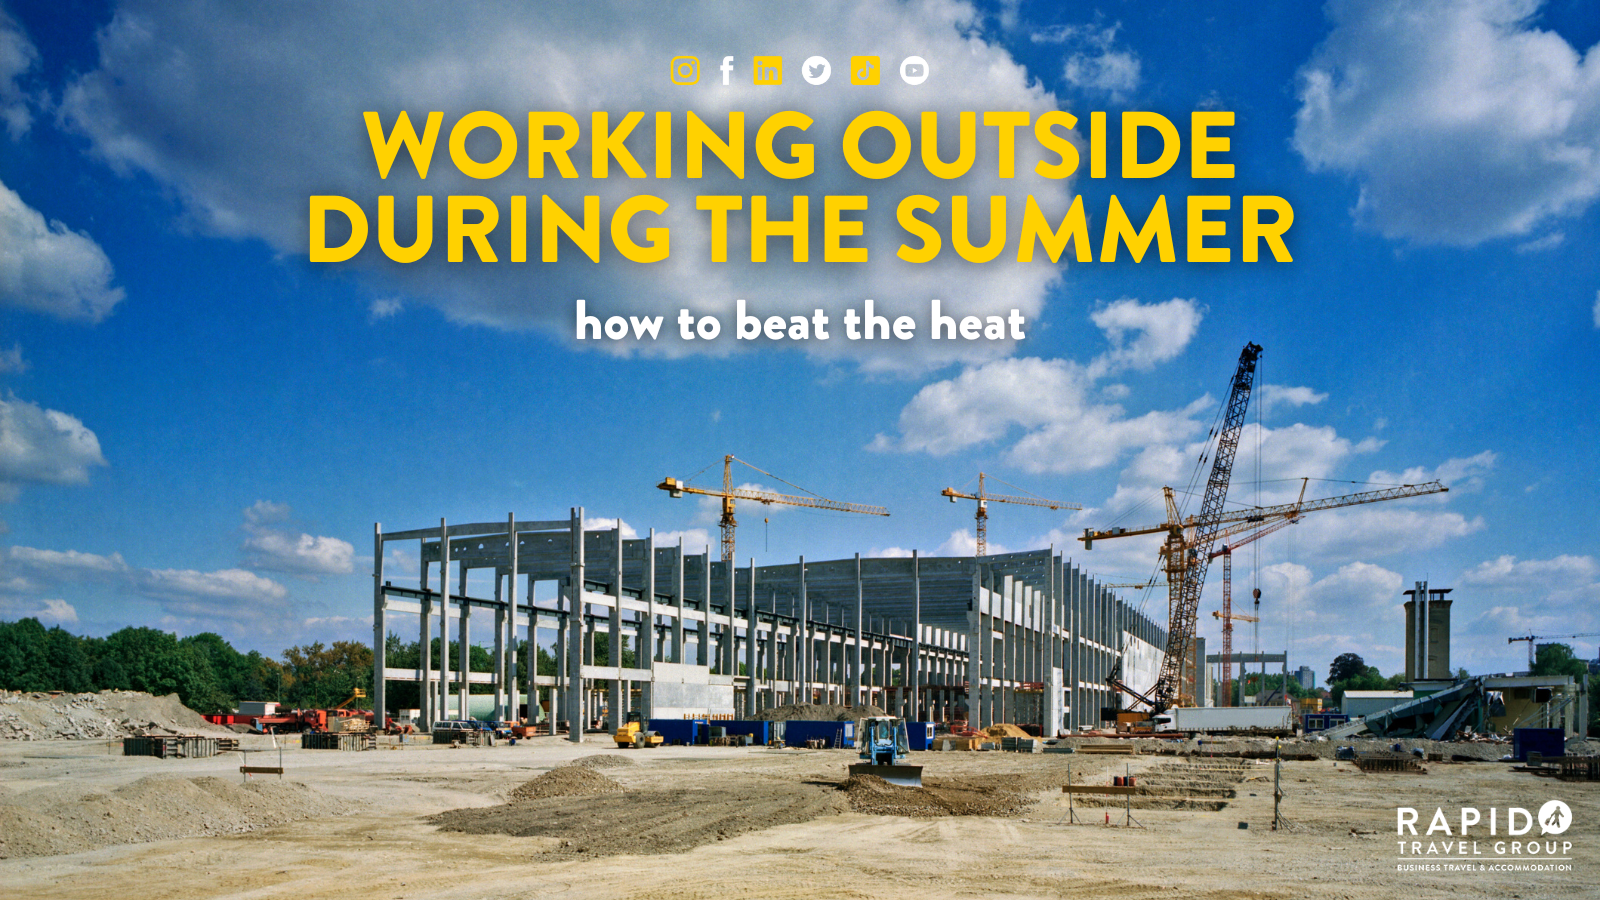 Working outside during the summer: how to beat the heat. Photo shows a construction site on a warm day with a blue sky and dry ground.